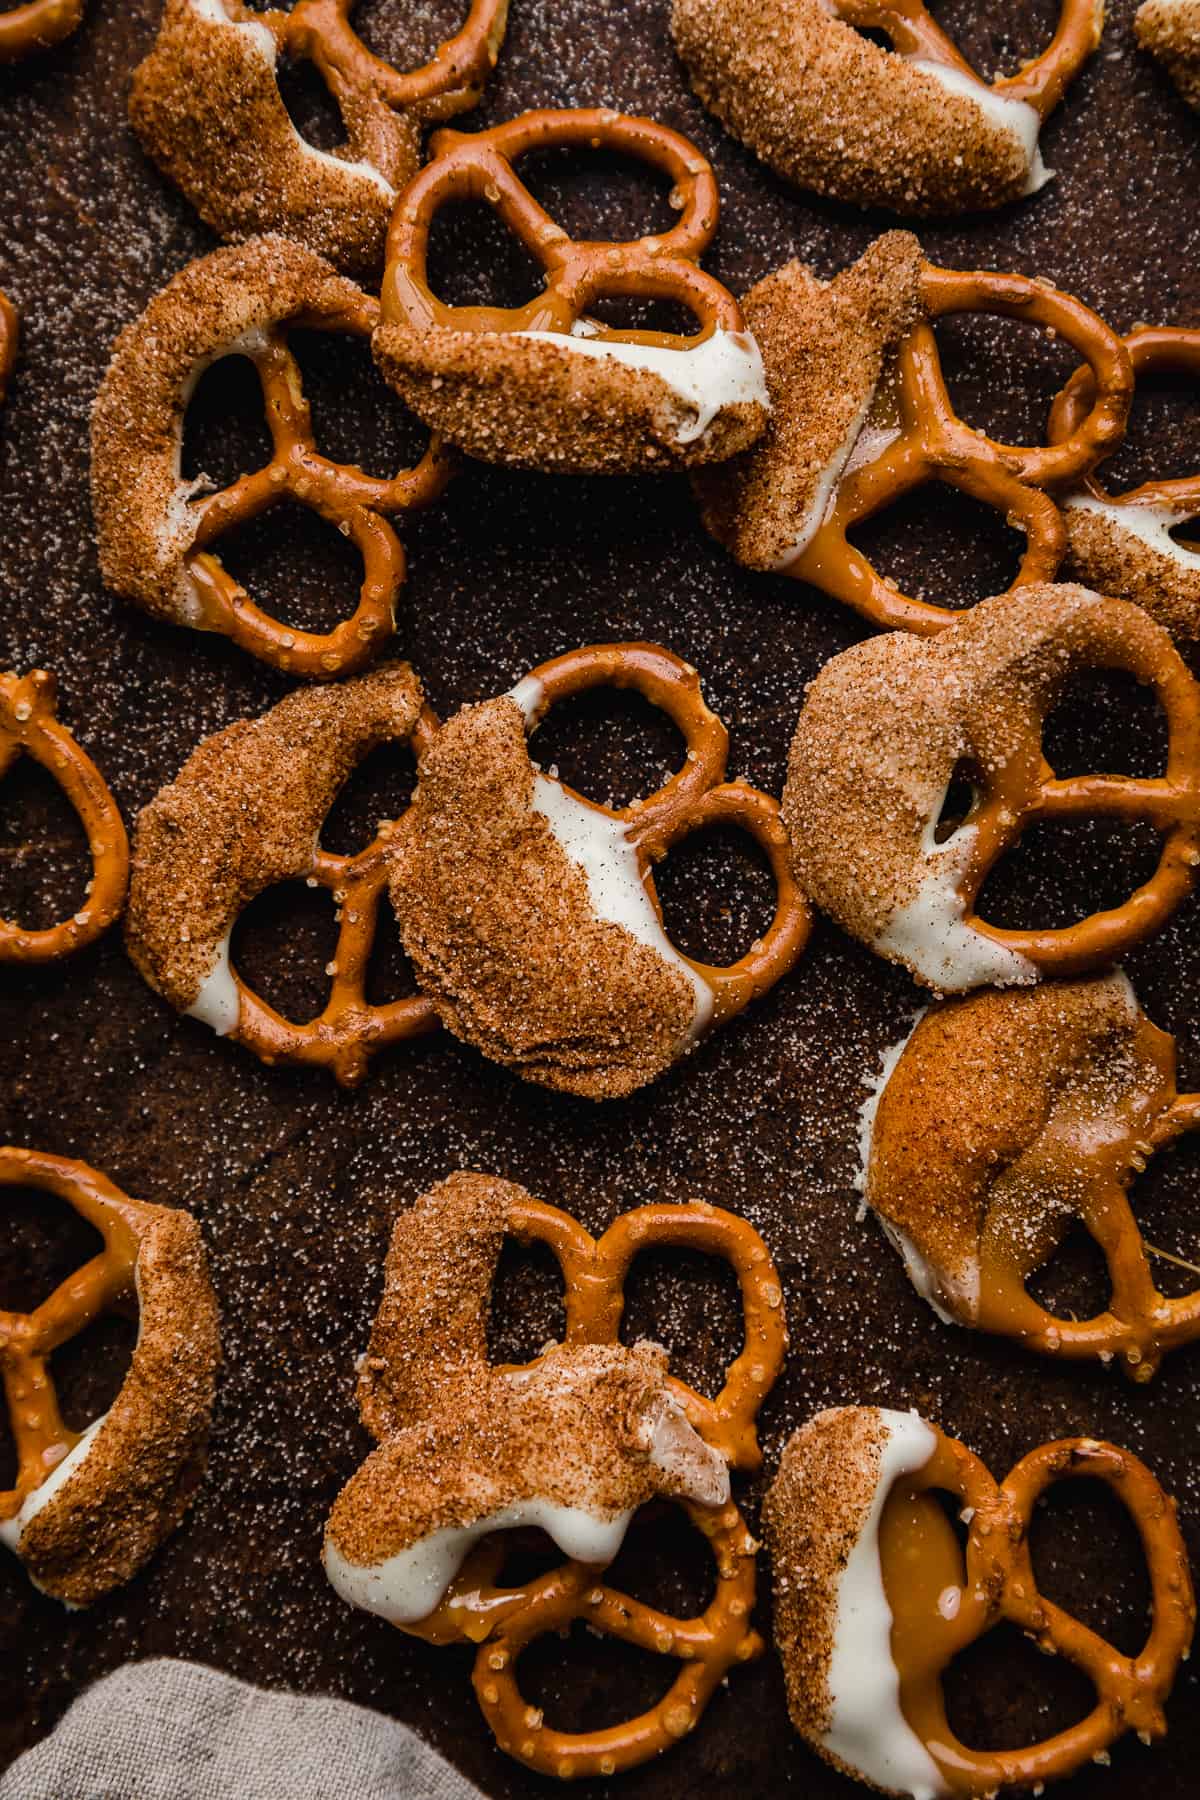 Pretzels coated in caramel, then white chocolate and a cinnamon sugar mixture on a brown background.